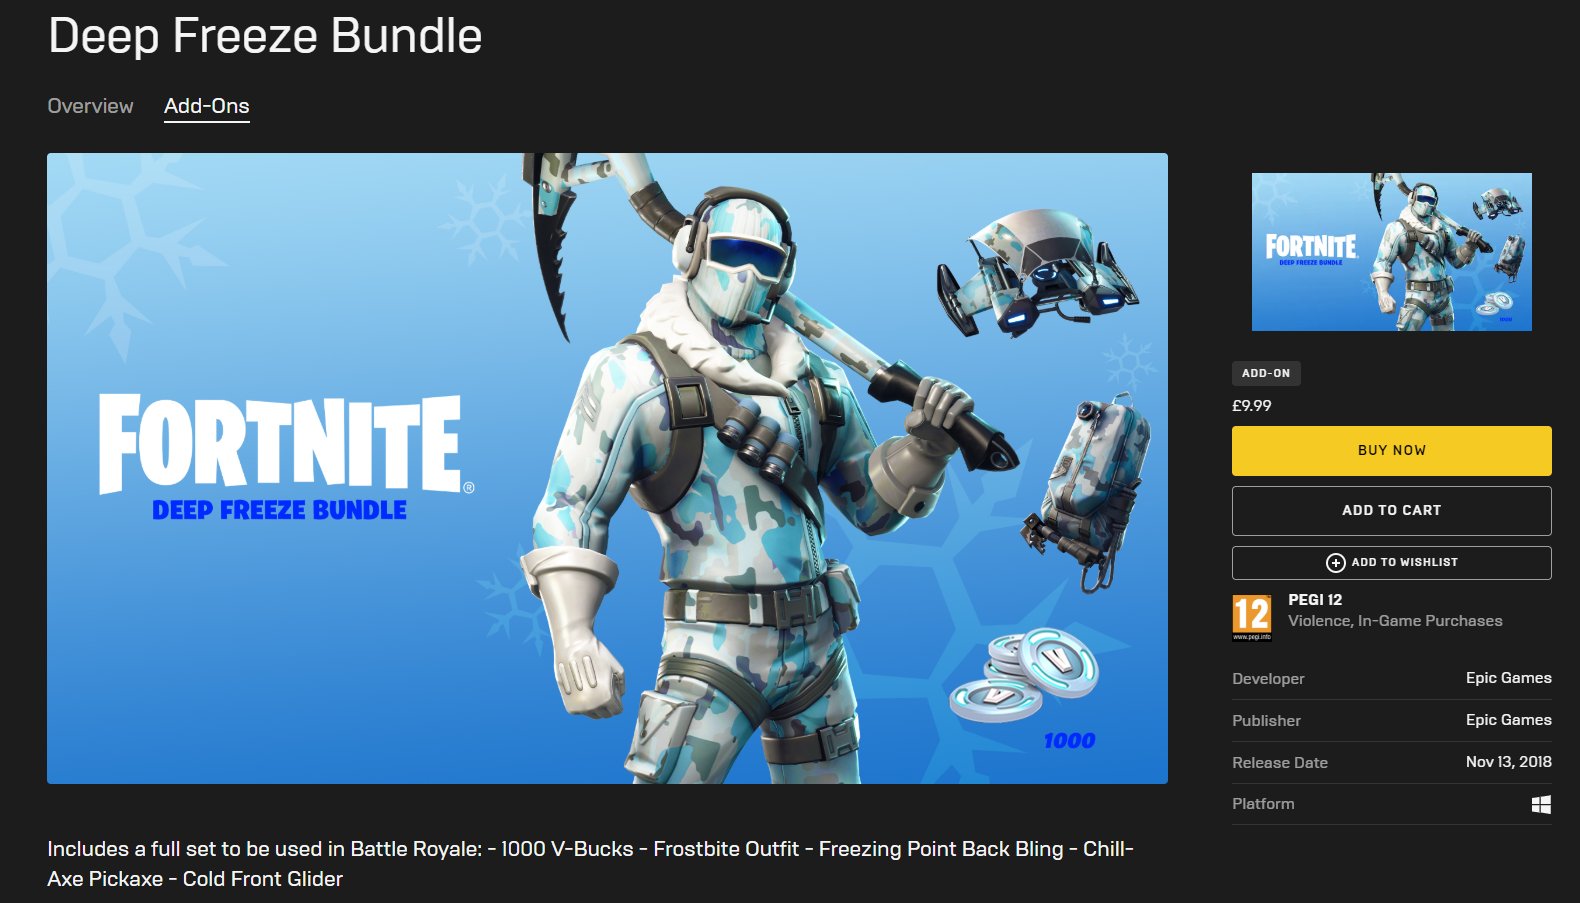 Fortnite News on Twitter: "The Deep Freeze Bundle has to the Epic Games Store. If you already own the cosmetics, you can buy the pack again to receive 3,000 V-Bucks for